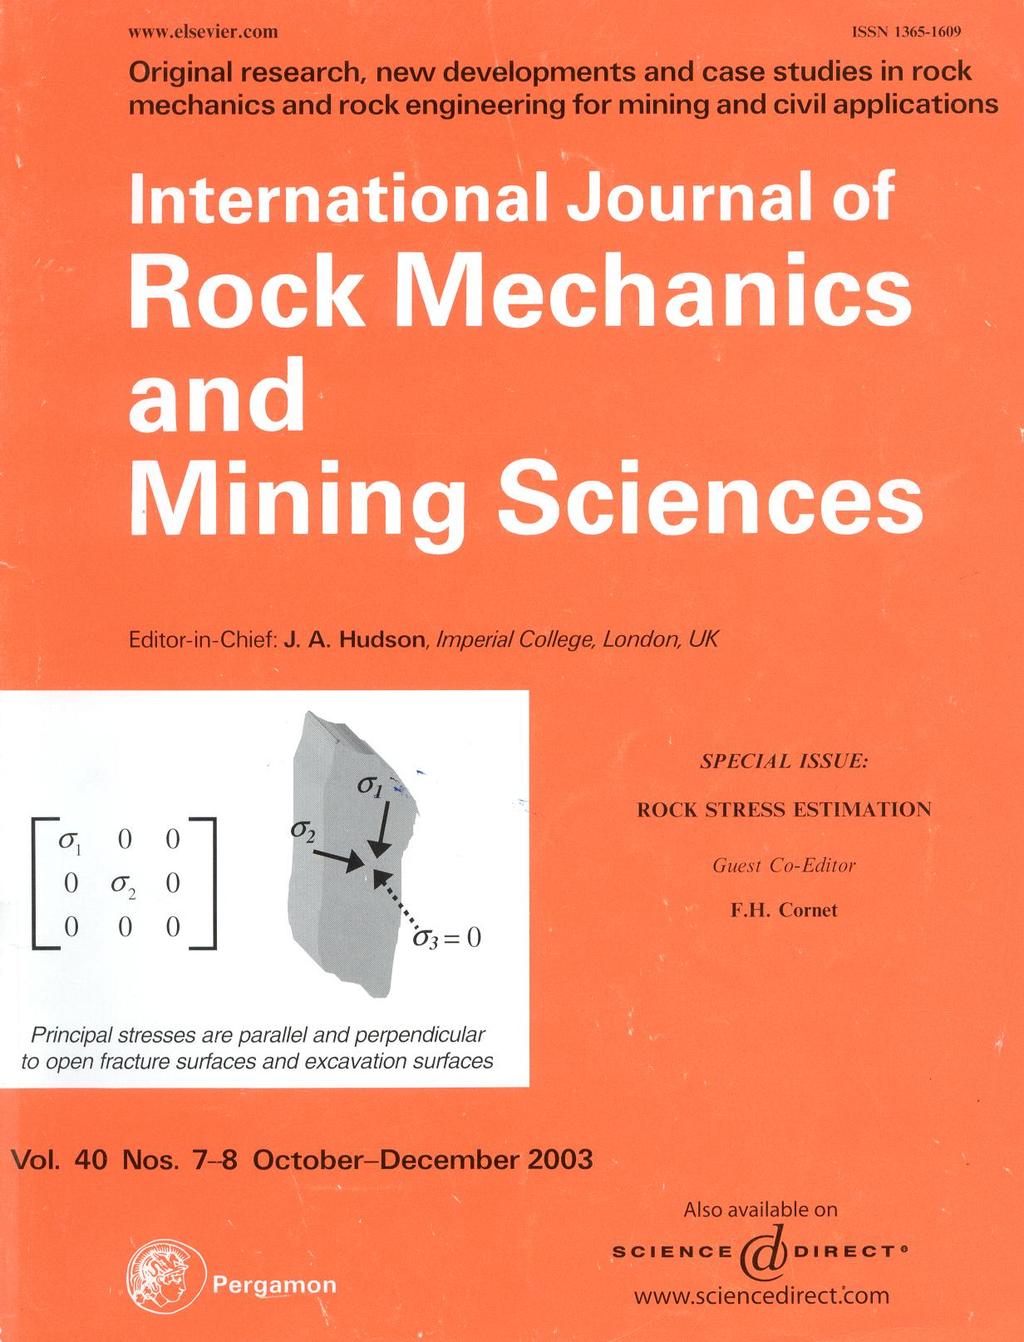 Exadaktylos notes Rock Mechanics part I Slide 57 of 31 Issue of this journal devoted to rock stress estimation which